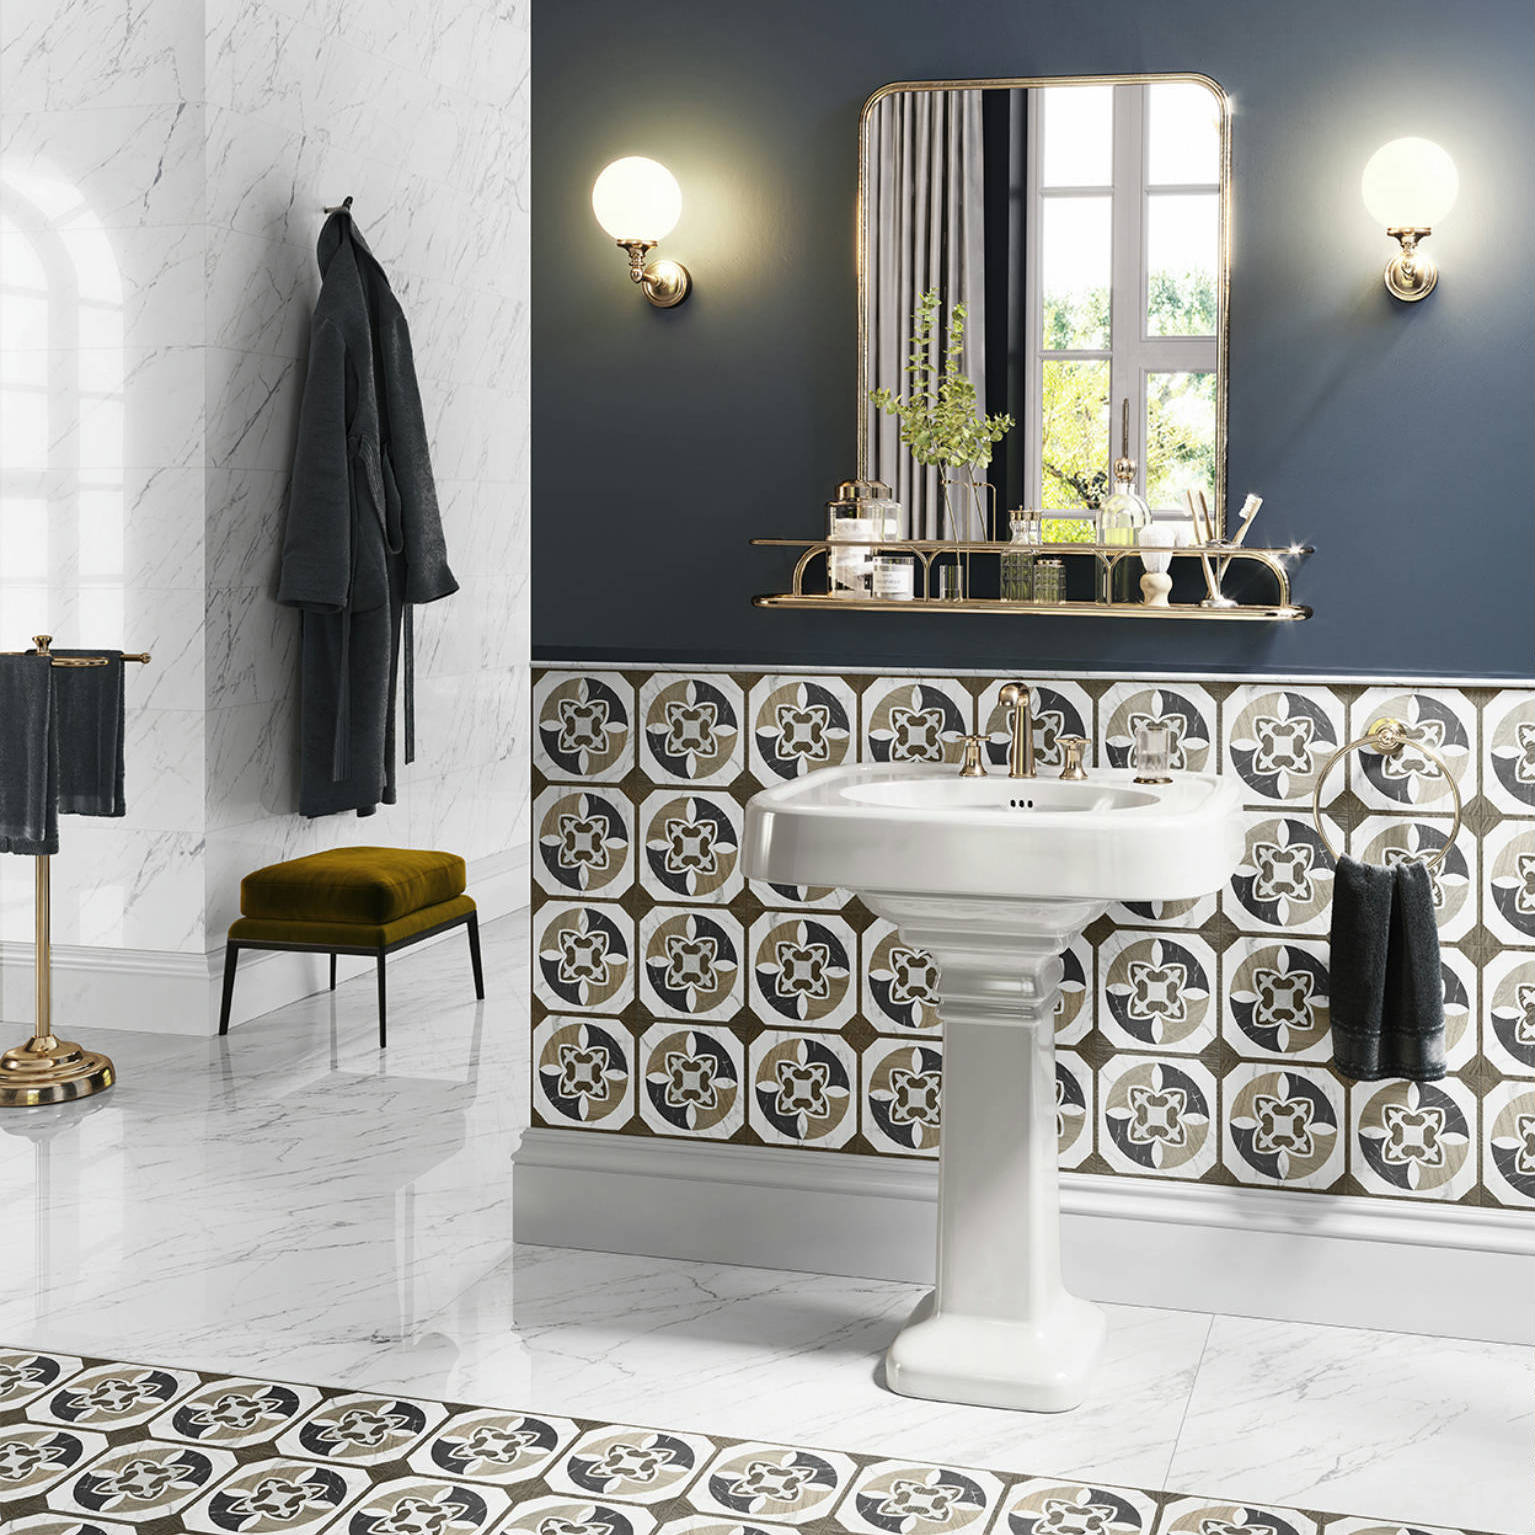 Intarsi_22_G | Stones And More | Finest selection of Mosaics, Glass, Tile and Stone